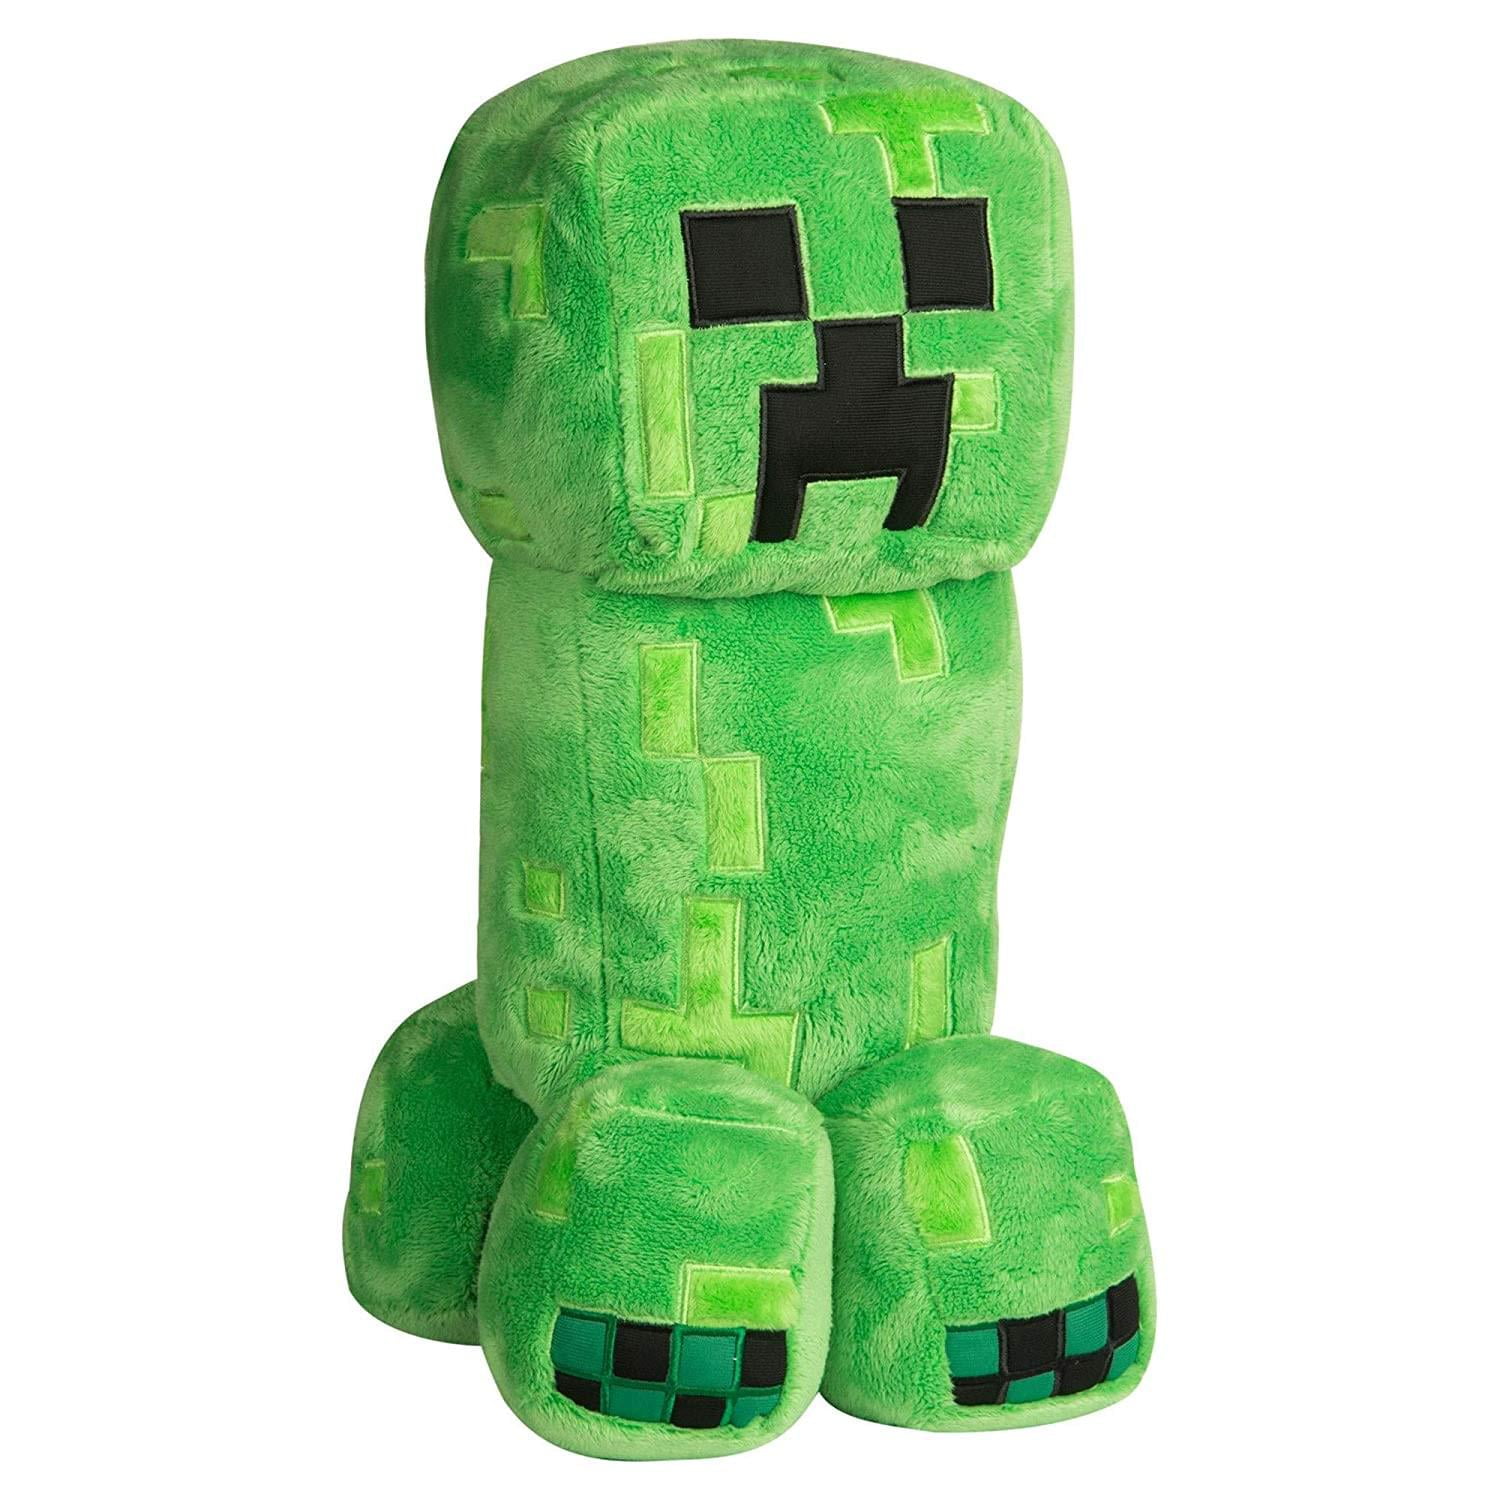 Minecraft Grand Adventure Series 16 Inch Collectible Plush Toy